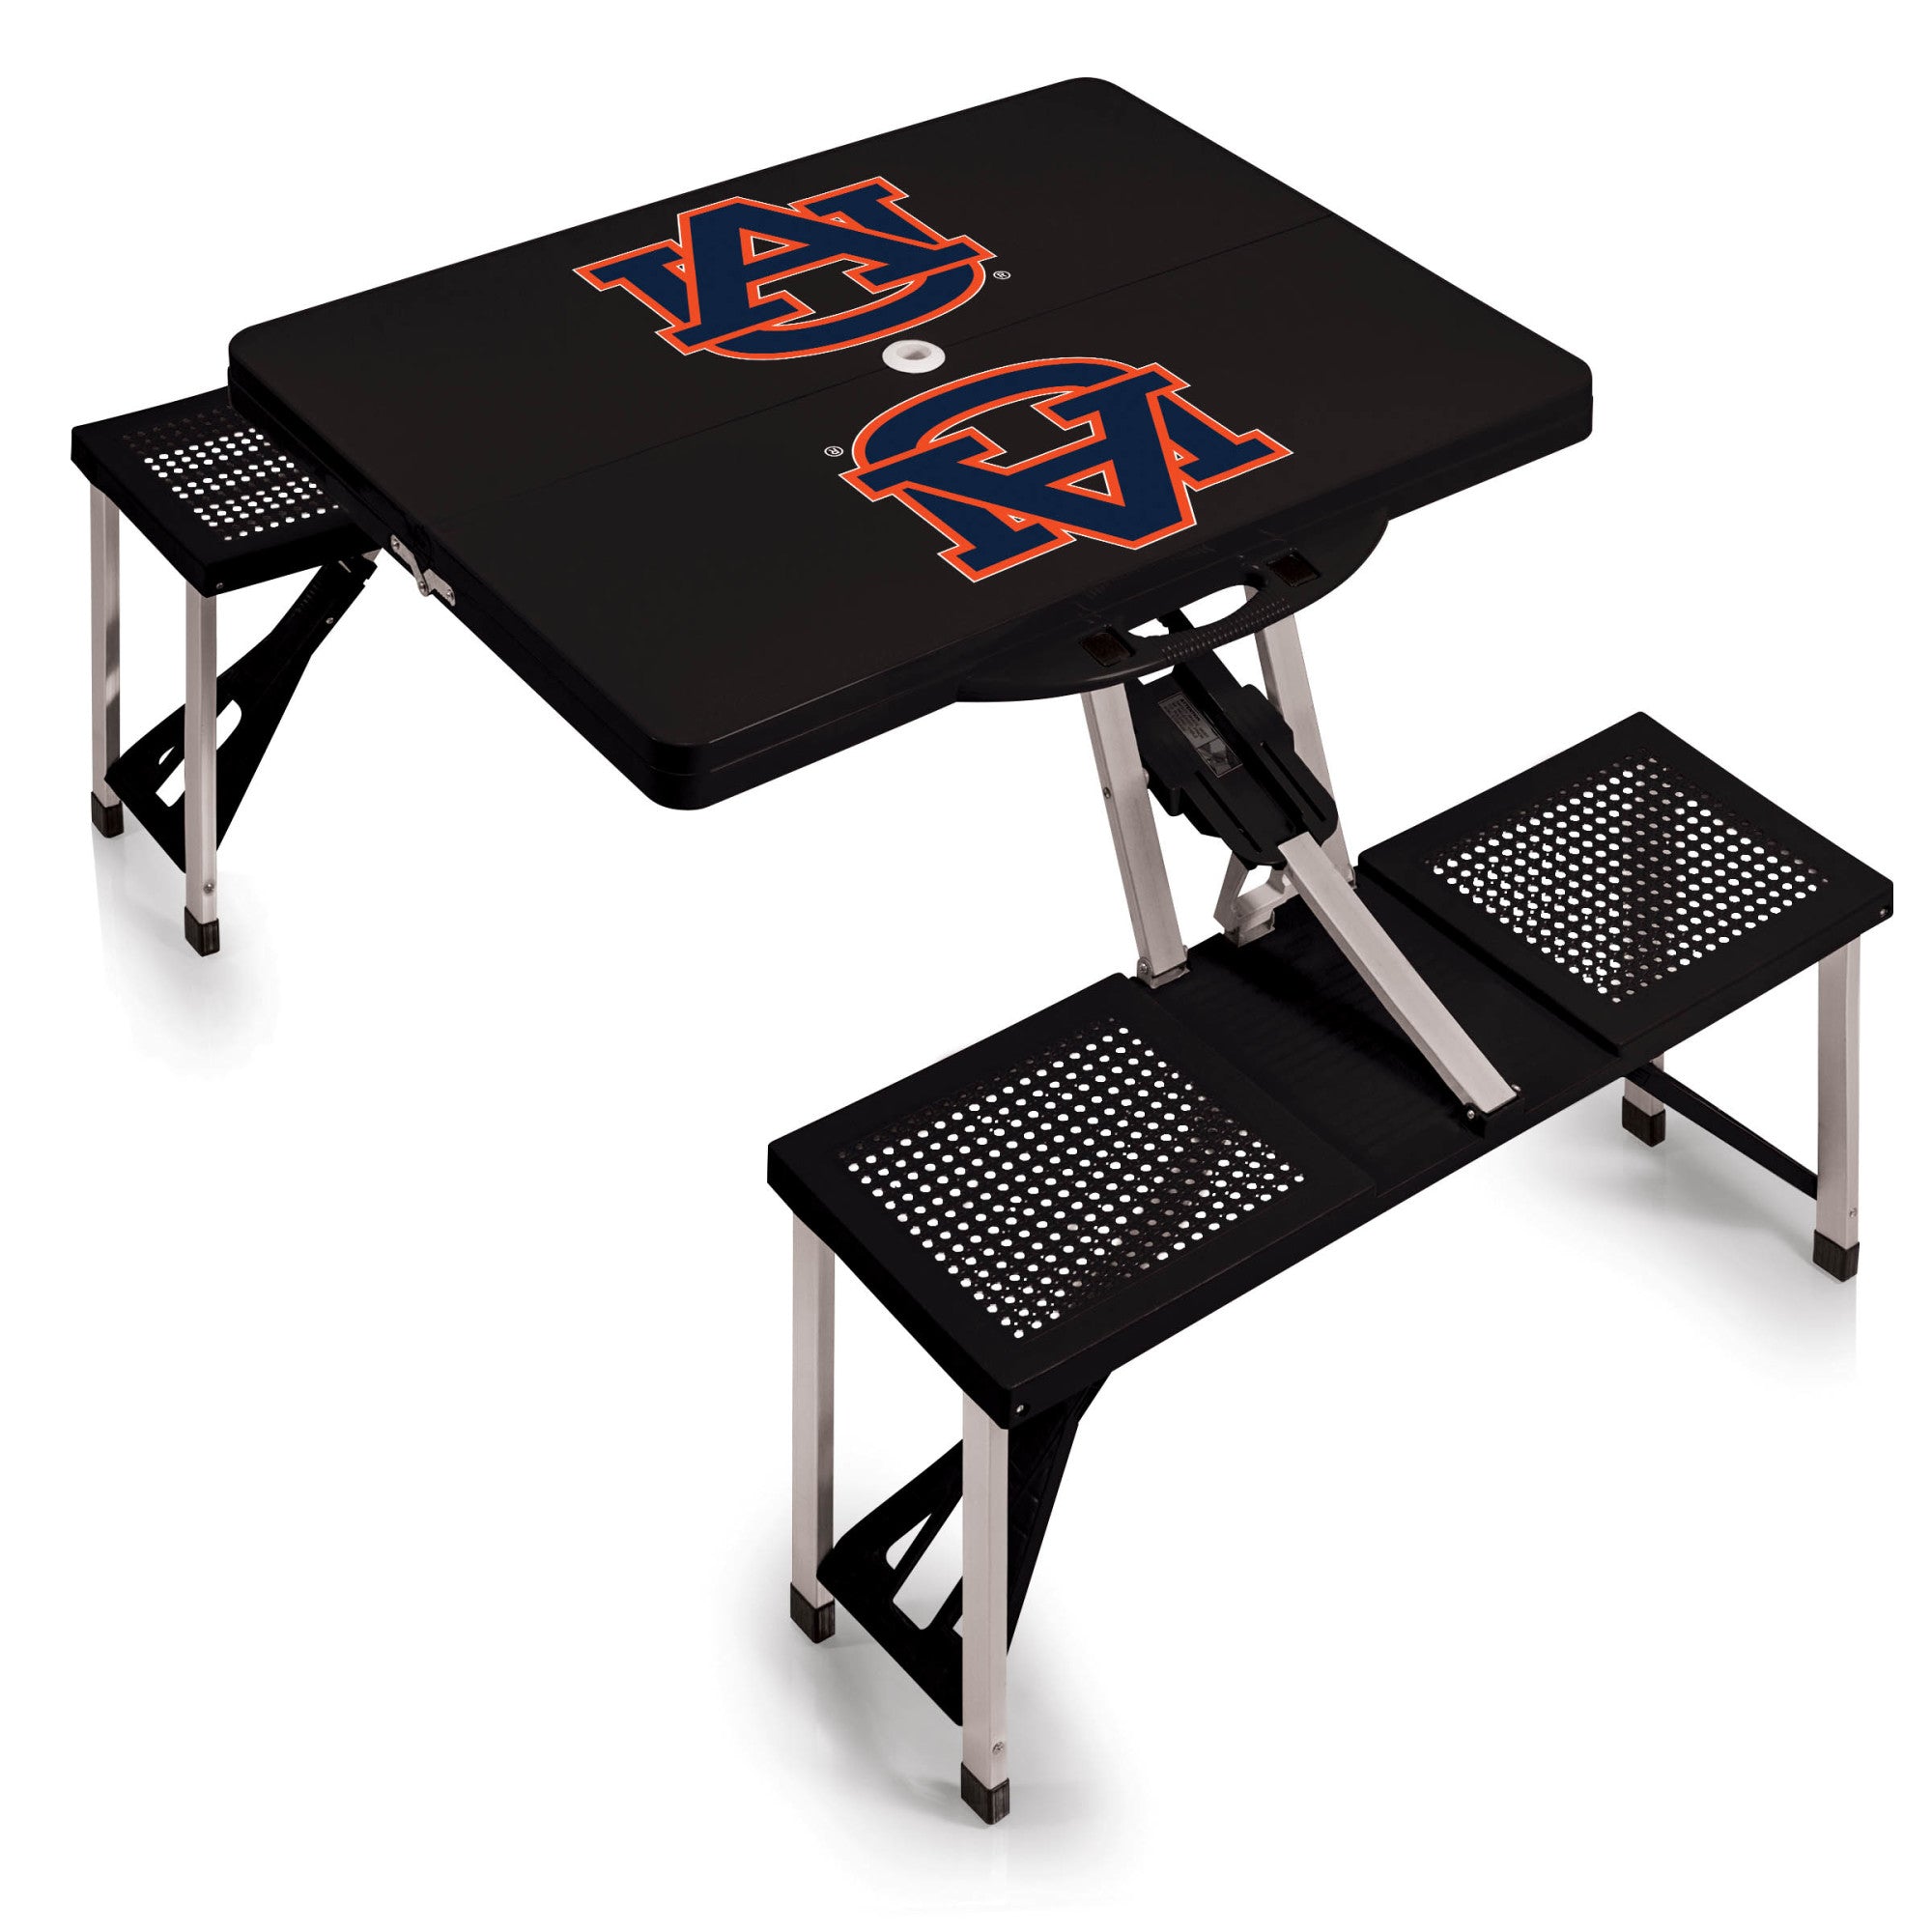 Auburn Tigers - Picnic Table Portable Folding Table with Seats